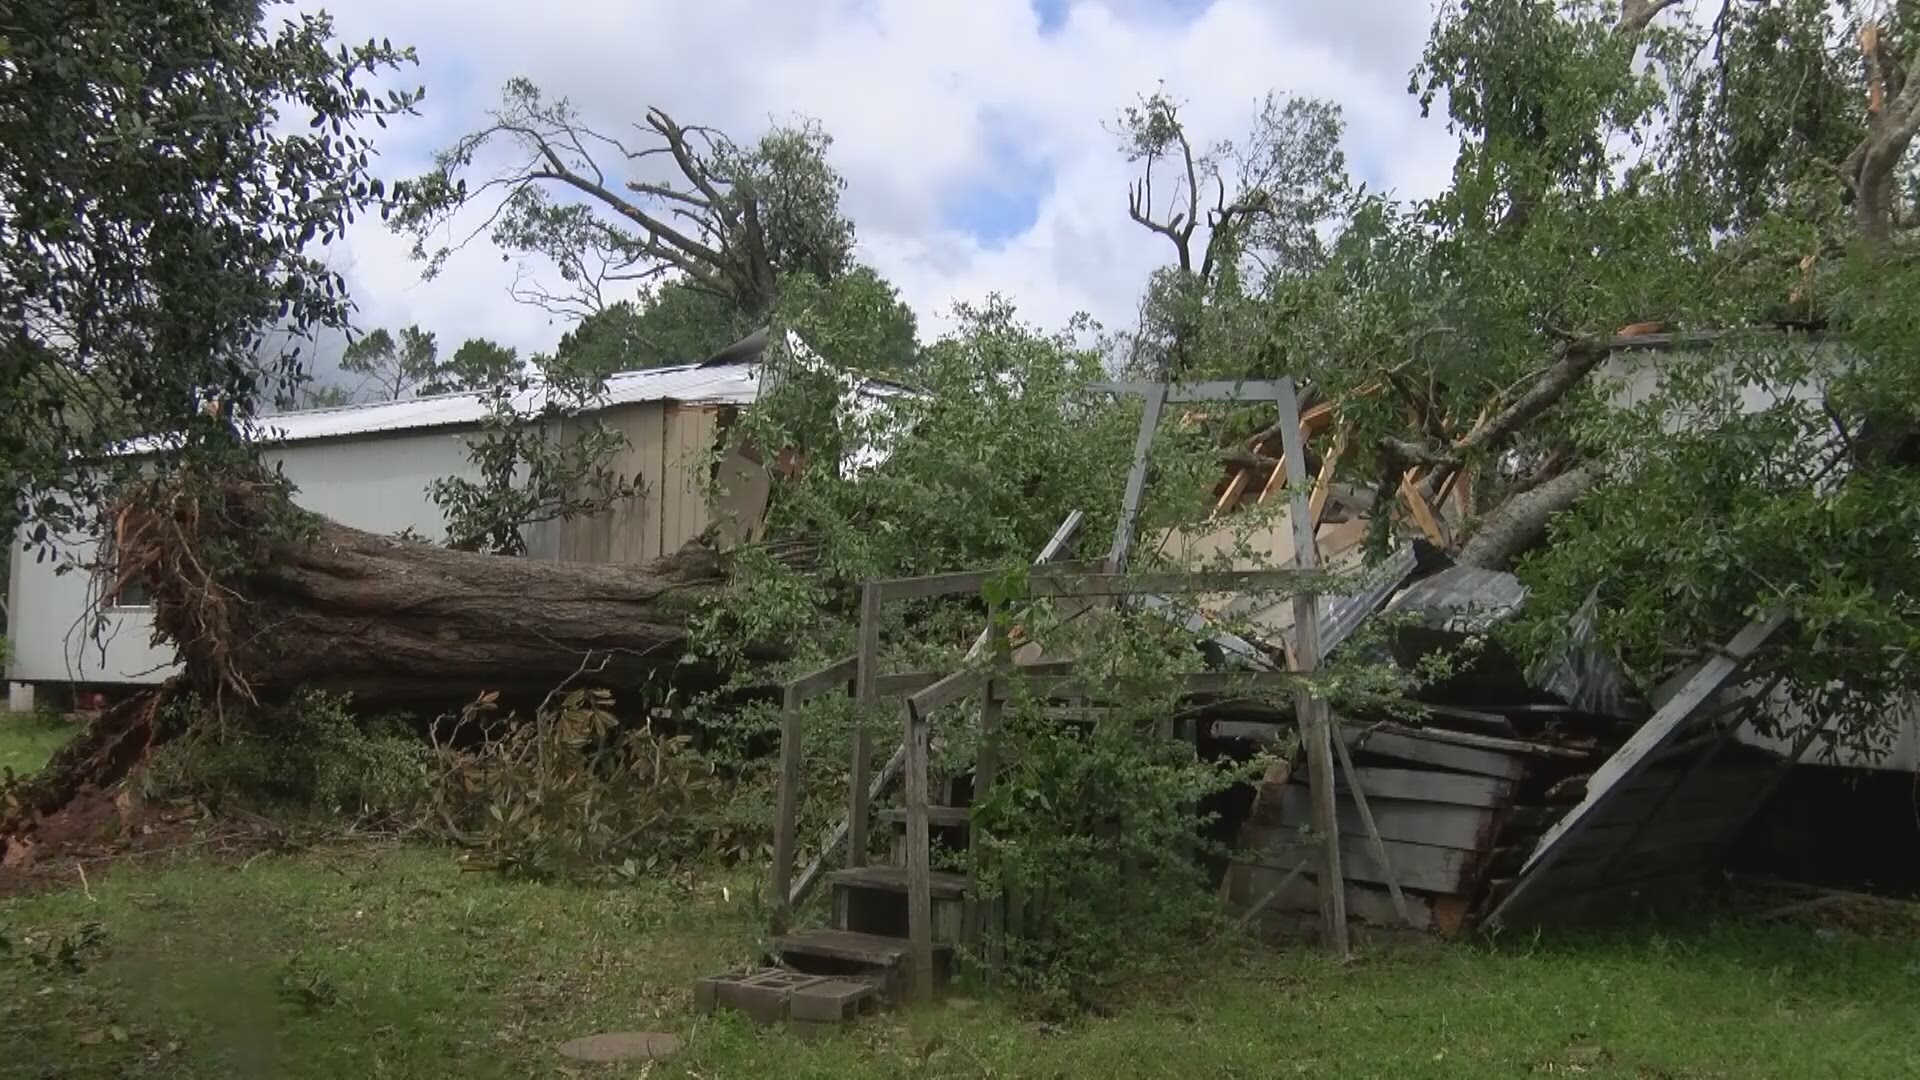 The severe weather season in East Texas has certainly felt active in 2019, but is it statistically more than usual? Meteorologist Michael Behrens breaks down the numbers!